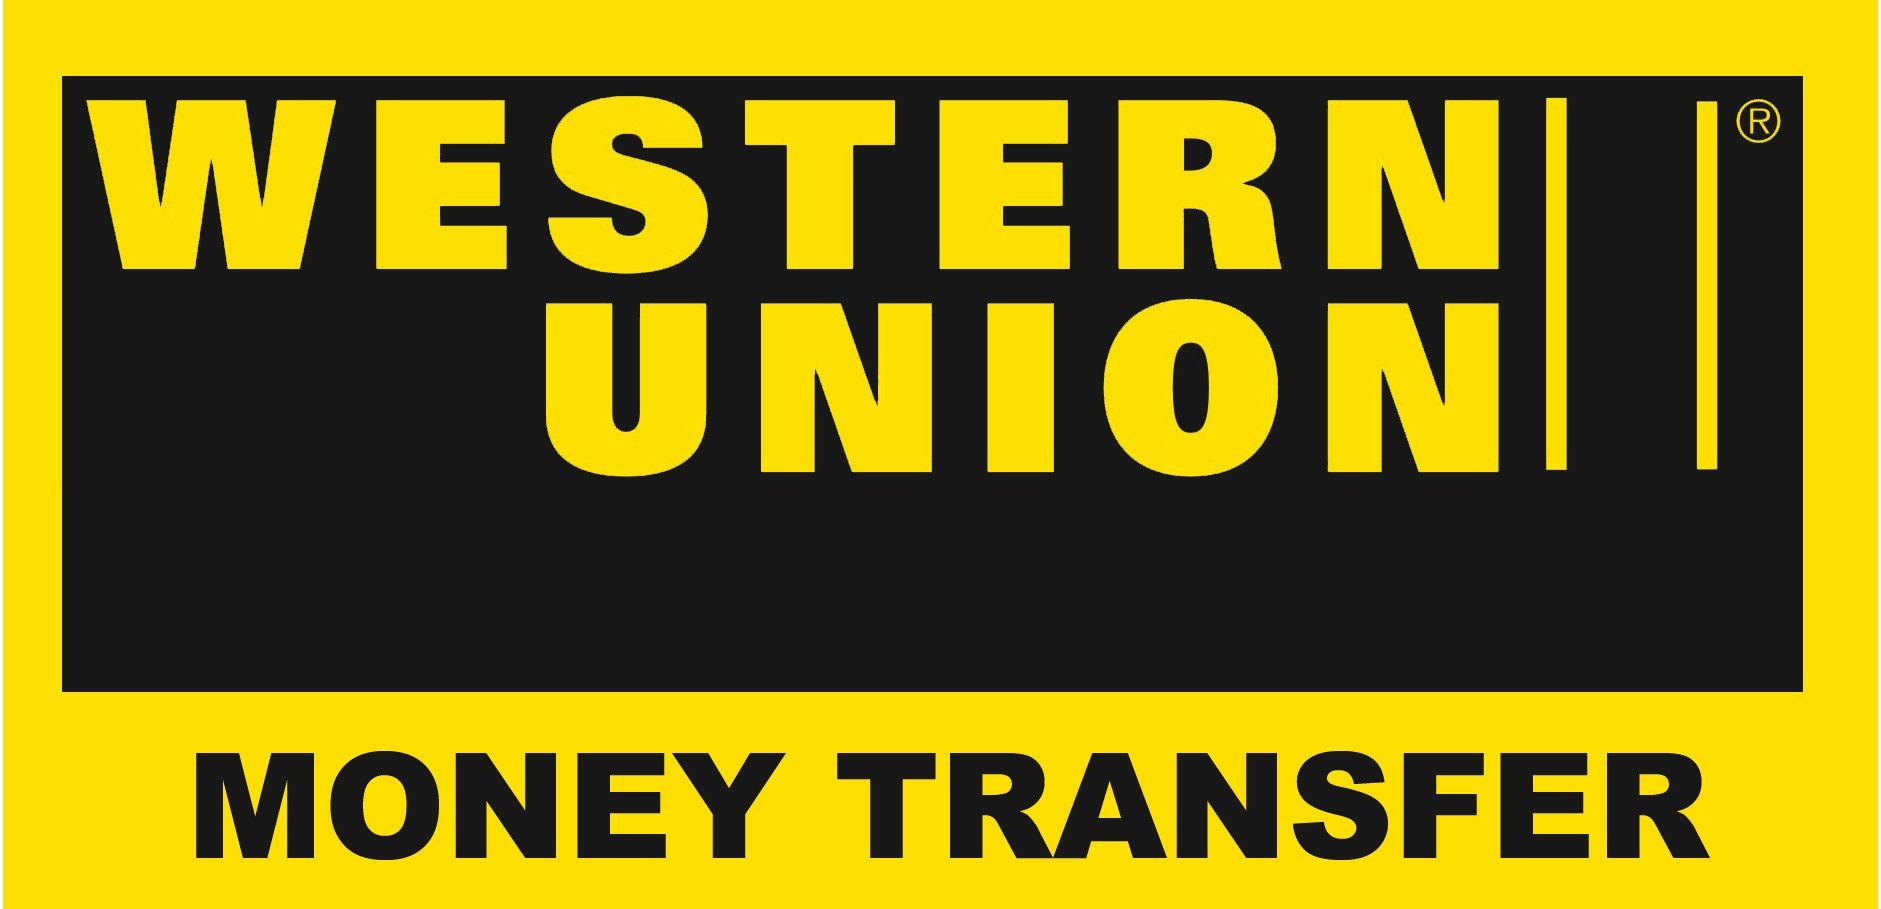 Western Union Logo - The Western Union Logo [High res] [Full color]